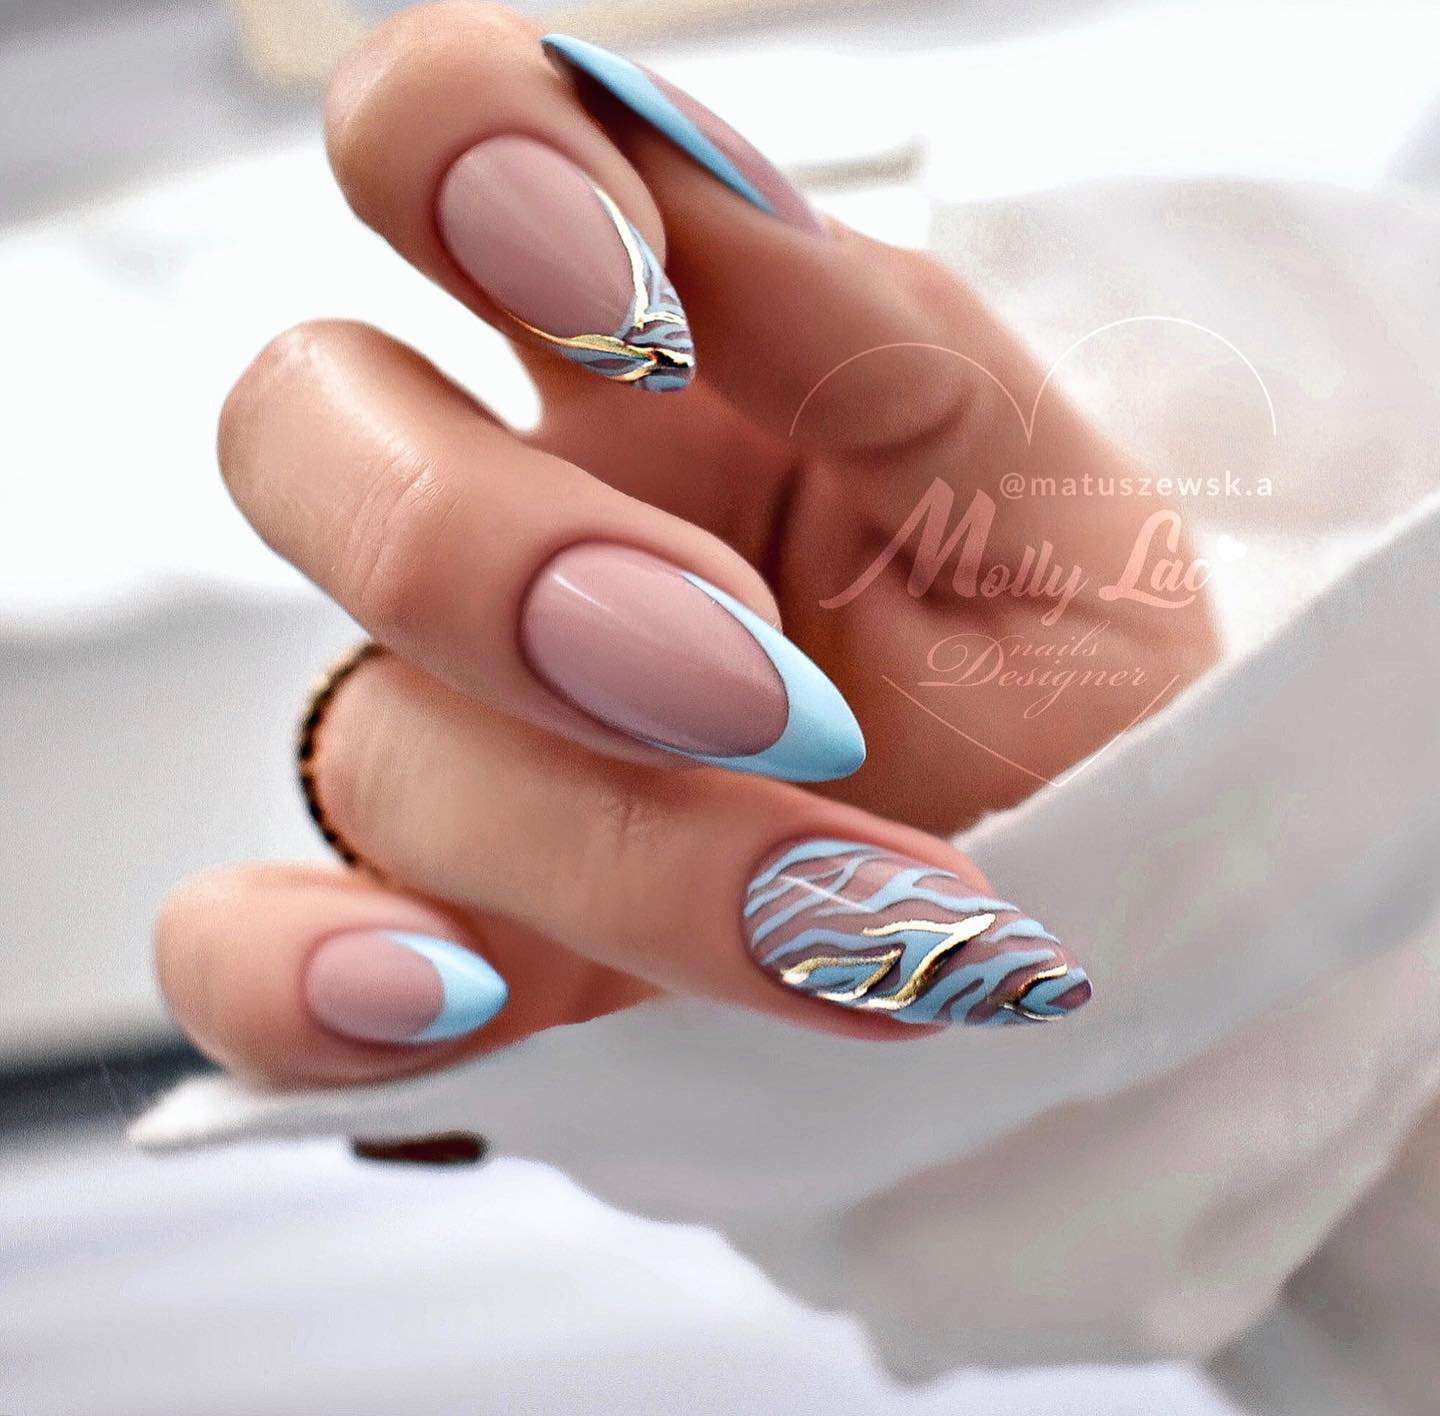 35 Nail Designs For 2022 You’ll Want To Try Immediately images 12